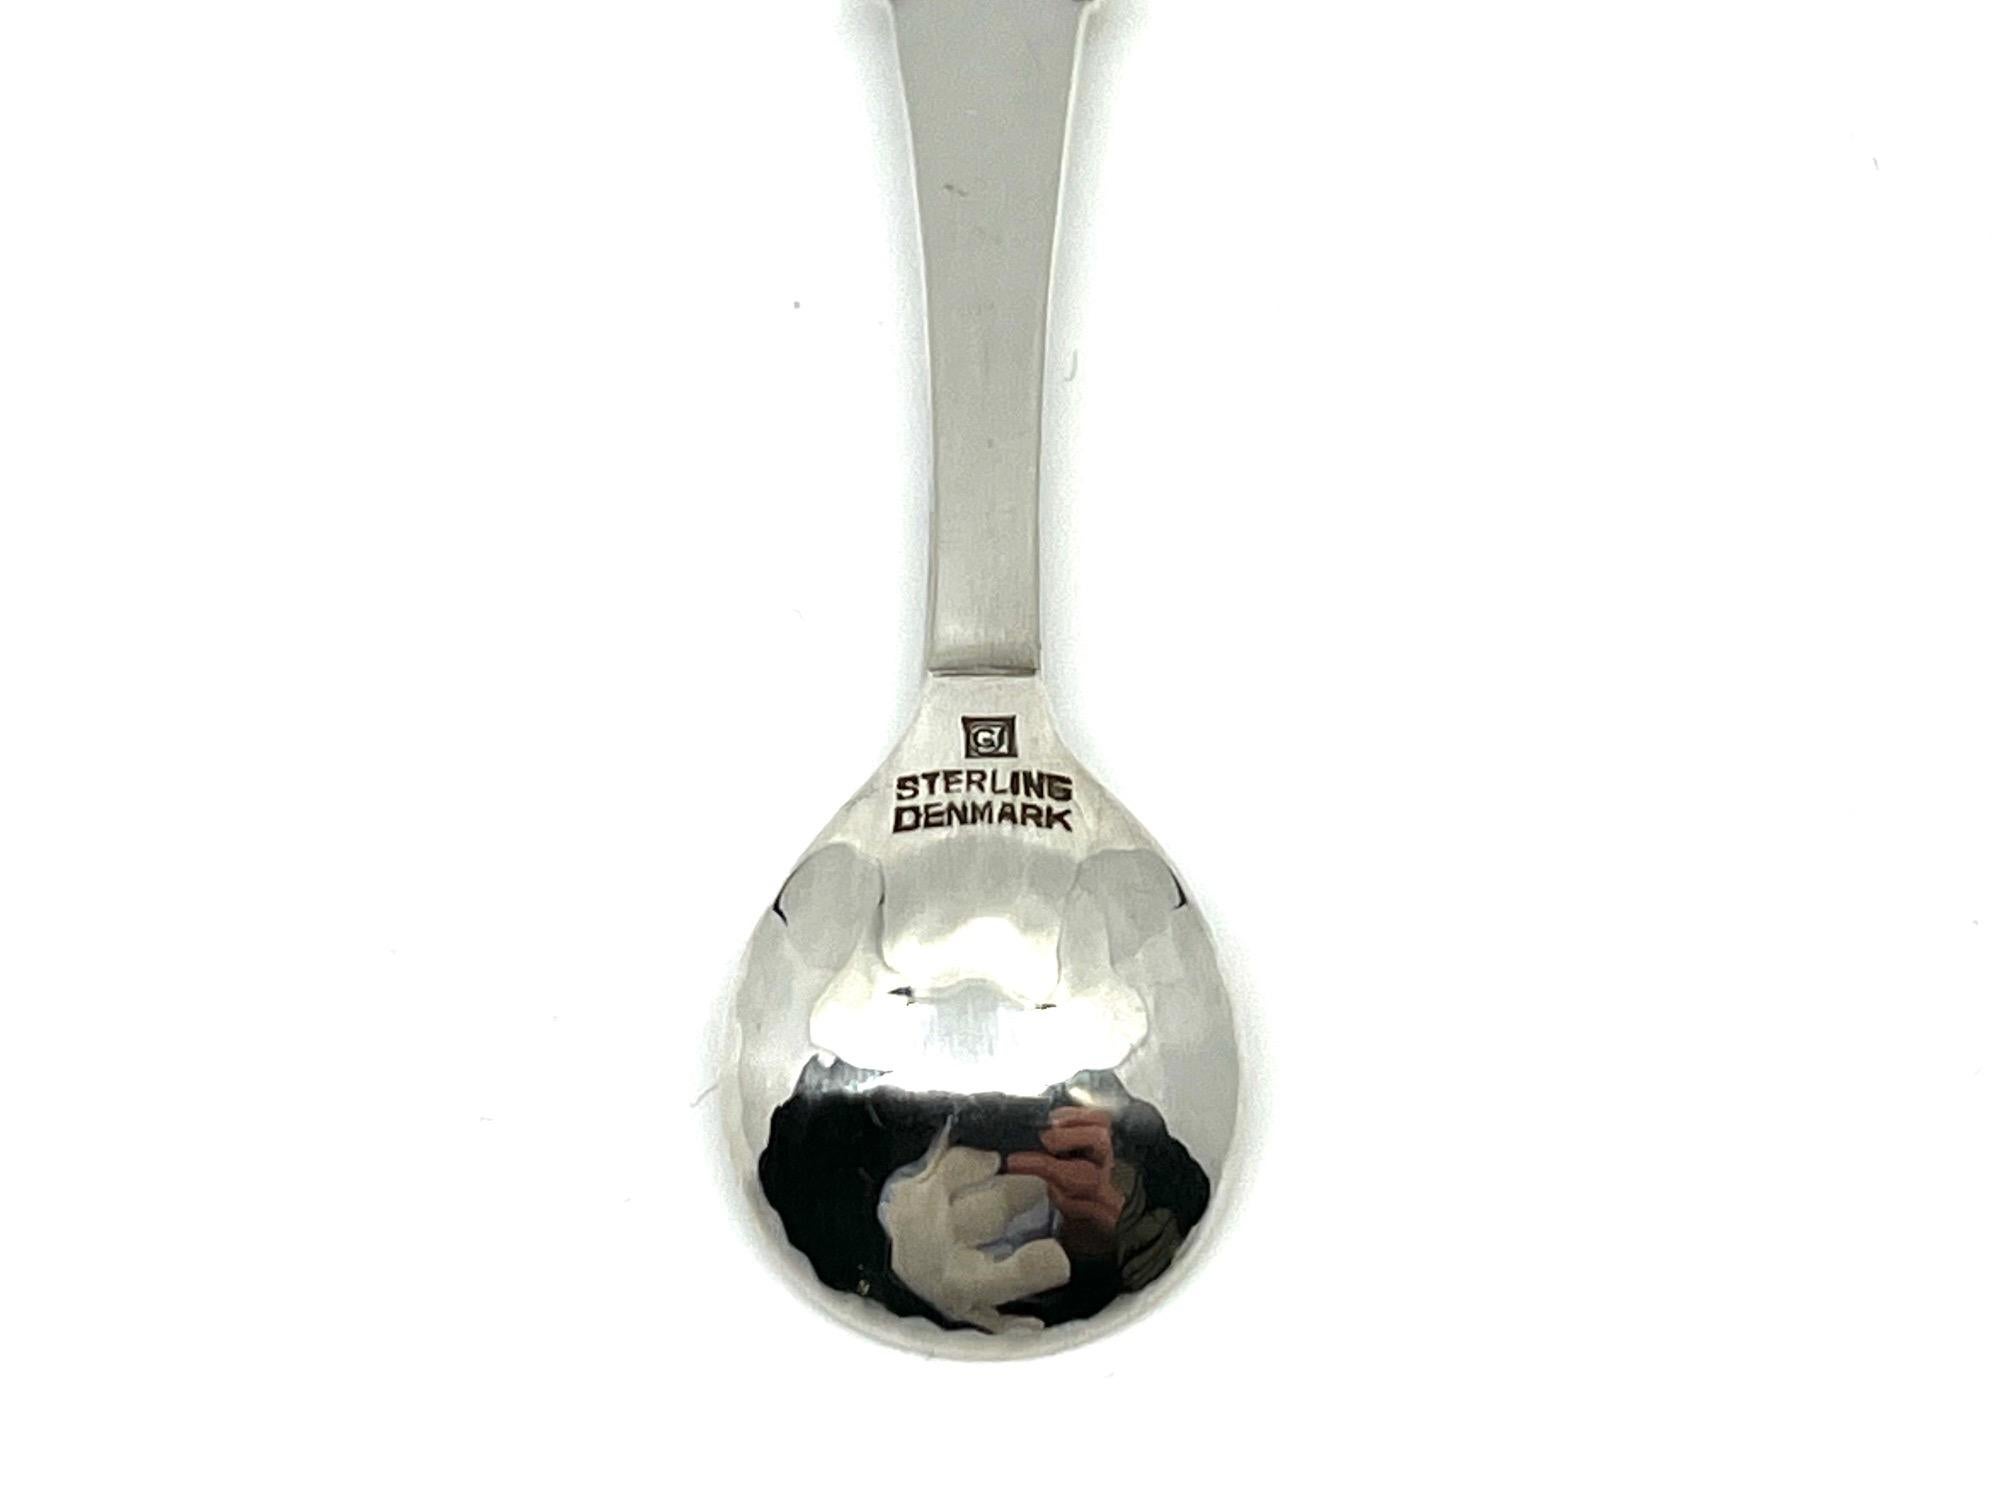 A sterling silver Georg Jensen salt spoon, item #104 in the Beaded Pattern, design #7 by Georg Jensen from 1916.

Additional information:
Material: Sterling silver
Styles: Art Nouveau
Hallmarks: With vintage Georg Jensen hallmark from